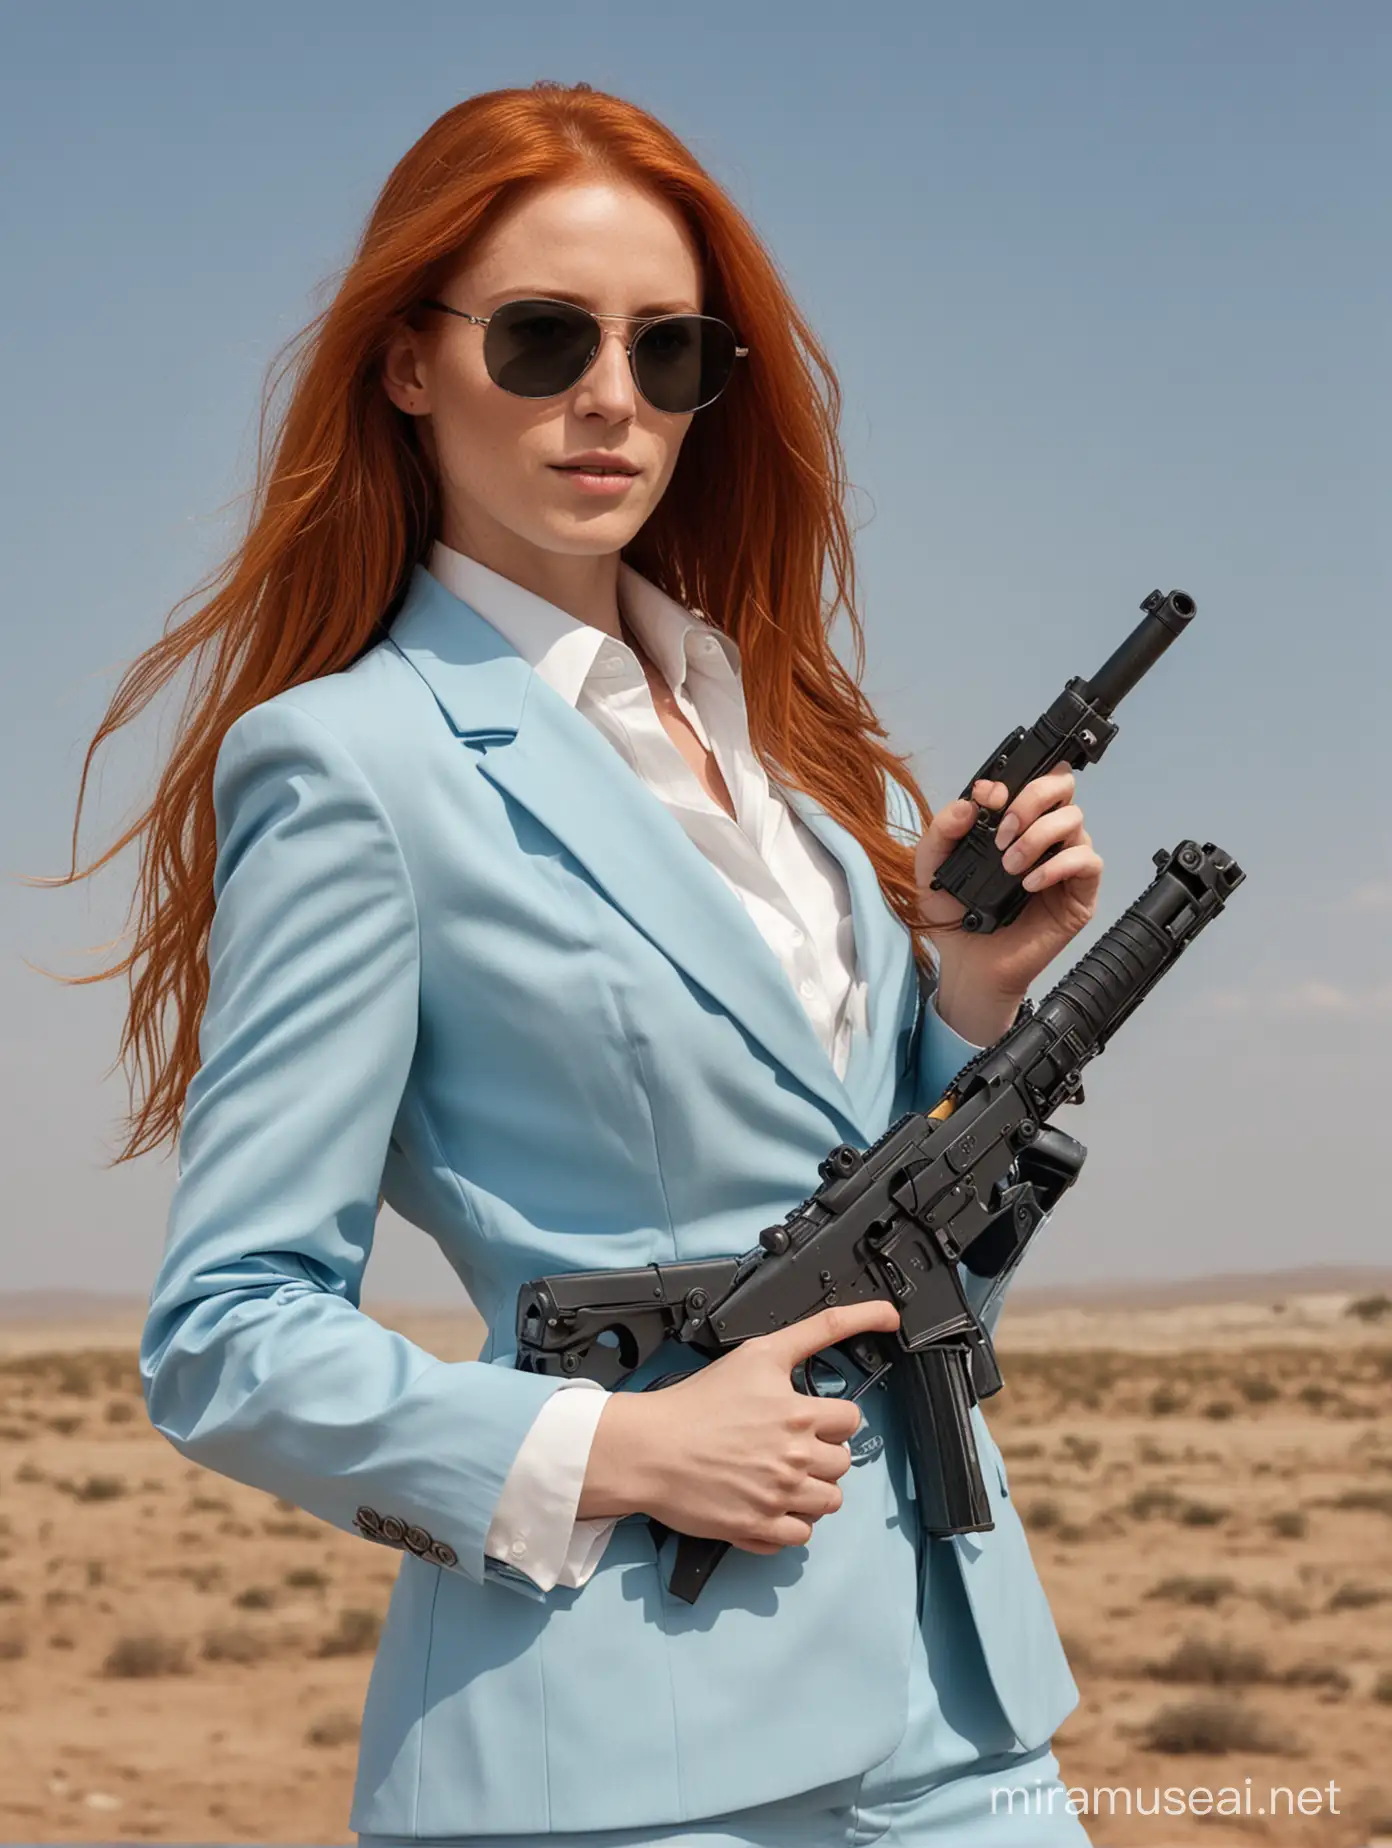 A woman with long red hair. She is dressed in a sky blue suit and a white shirt. She also wears a black necktie. She wears sunglasses and has a very pale appearance. She holds a machine gun.